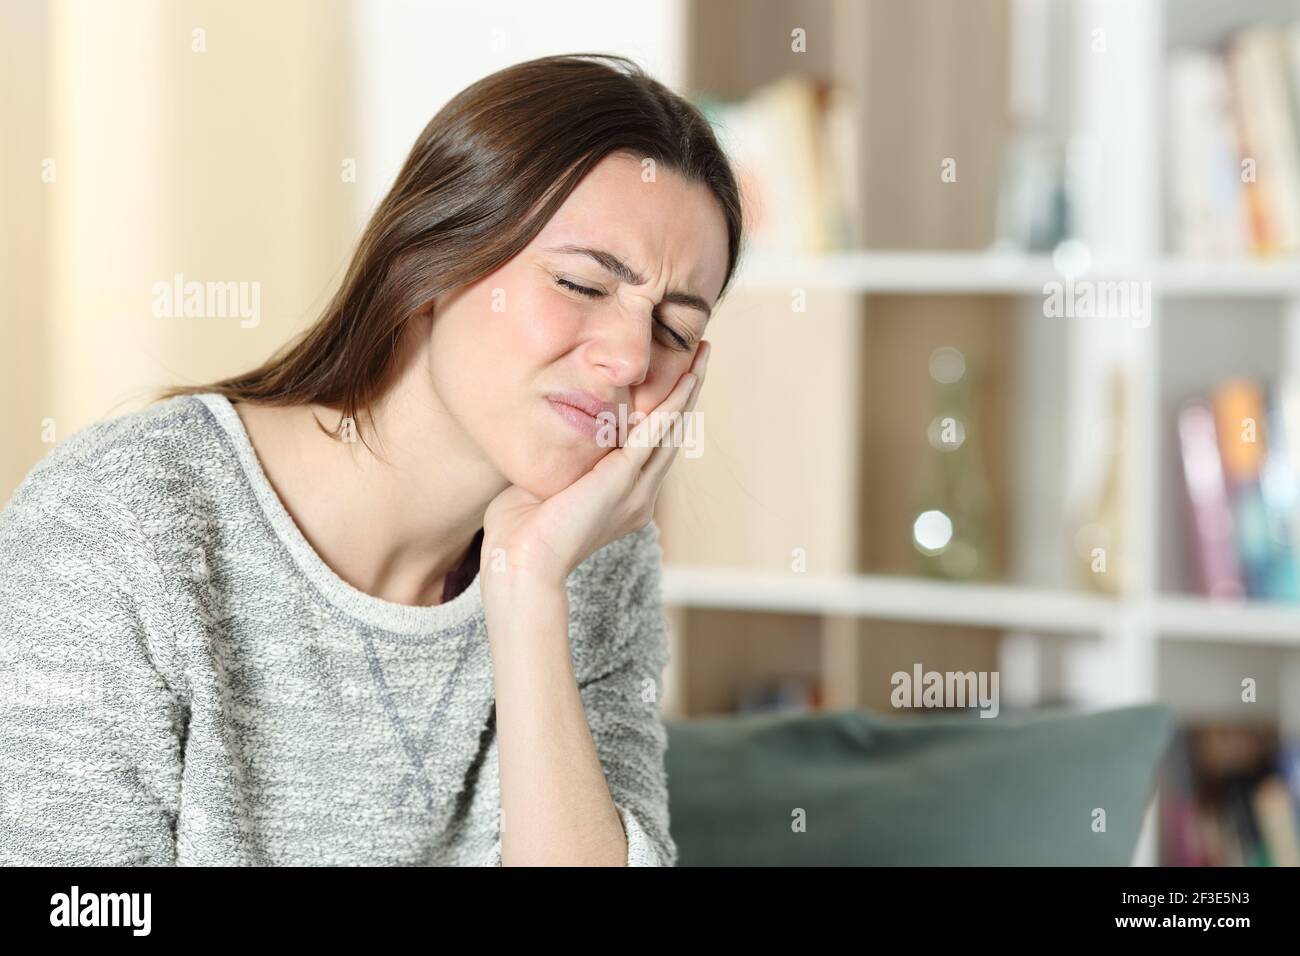 Stressed woman suffering toothache complaining touching cheek on a couch at home Stock Photo